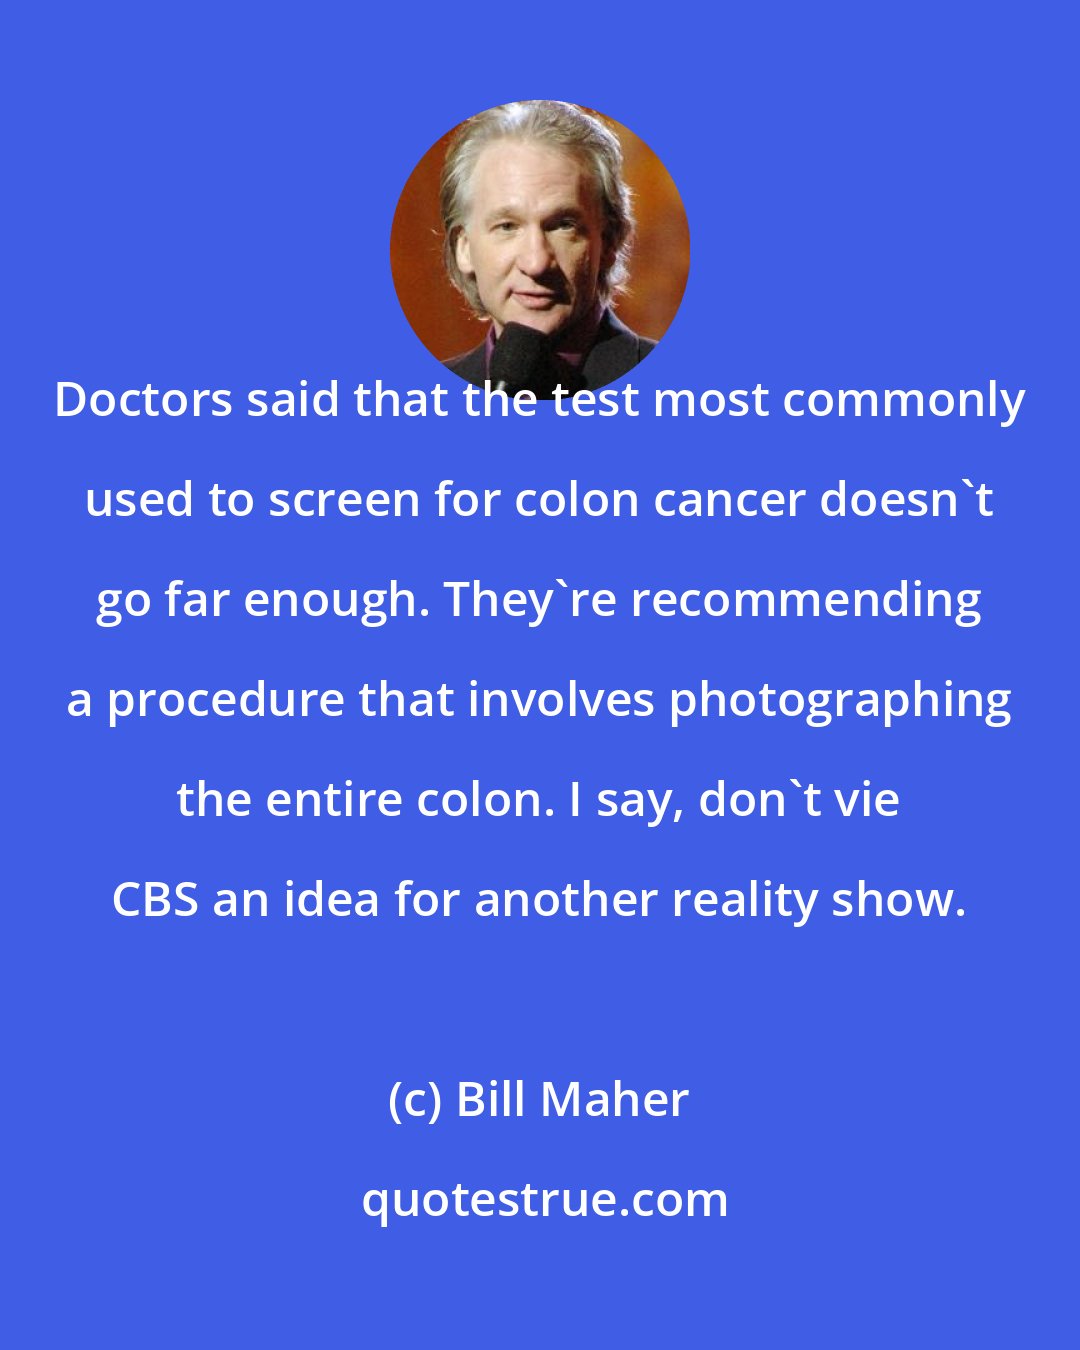 Bill Maher: Doctors said that the test most commonly used to screen for colon cancer doesn't go far enough. They're recommending a procedure that involves photographing the entire colon. I say, don't vie CBS an idea for another reality show.